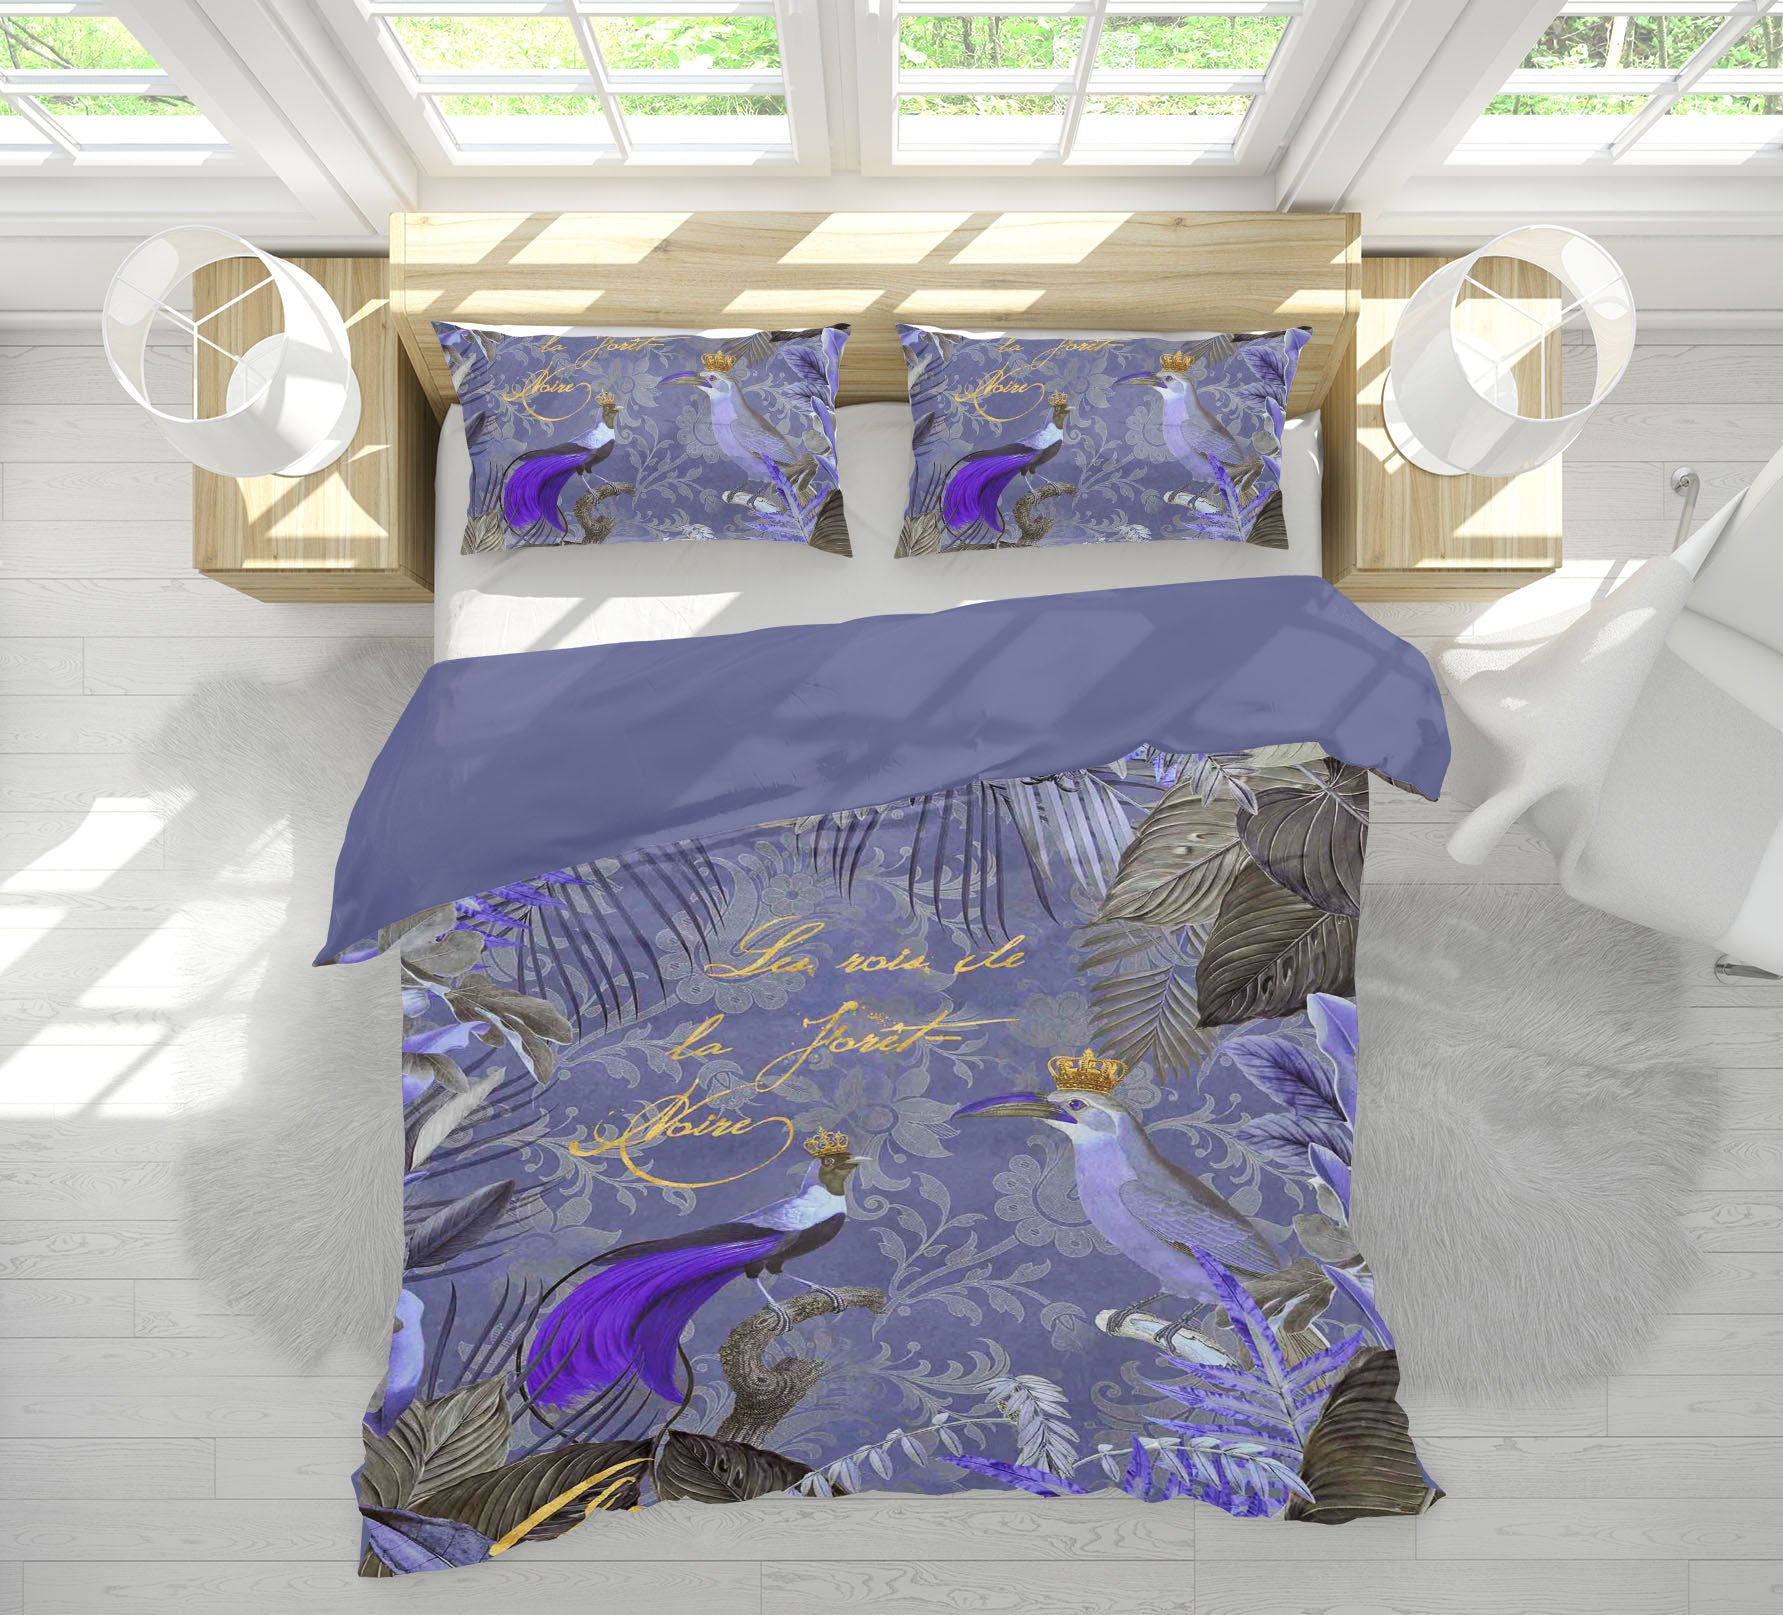 3D Kings Of The Jungle 2135 Andrea haase Bedding Bed Pillowcases Quilt